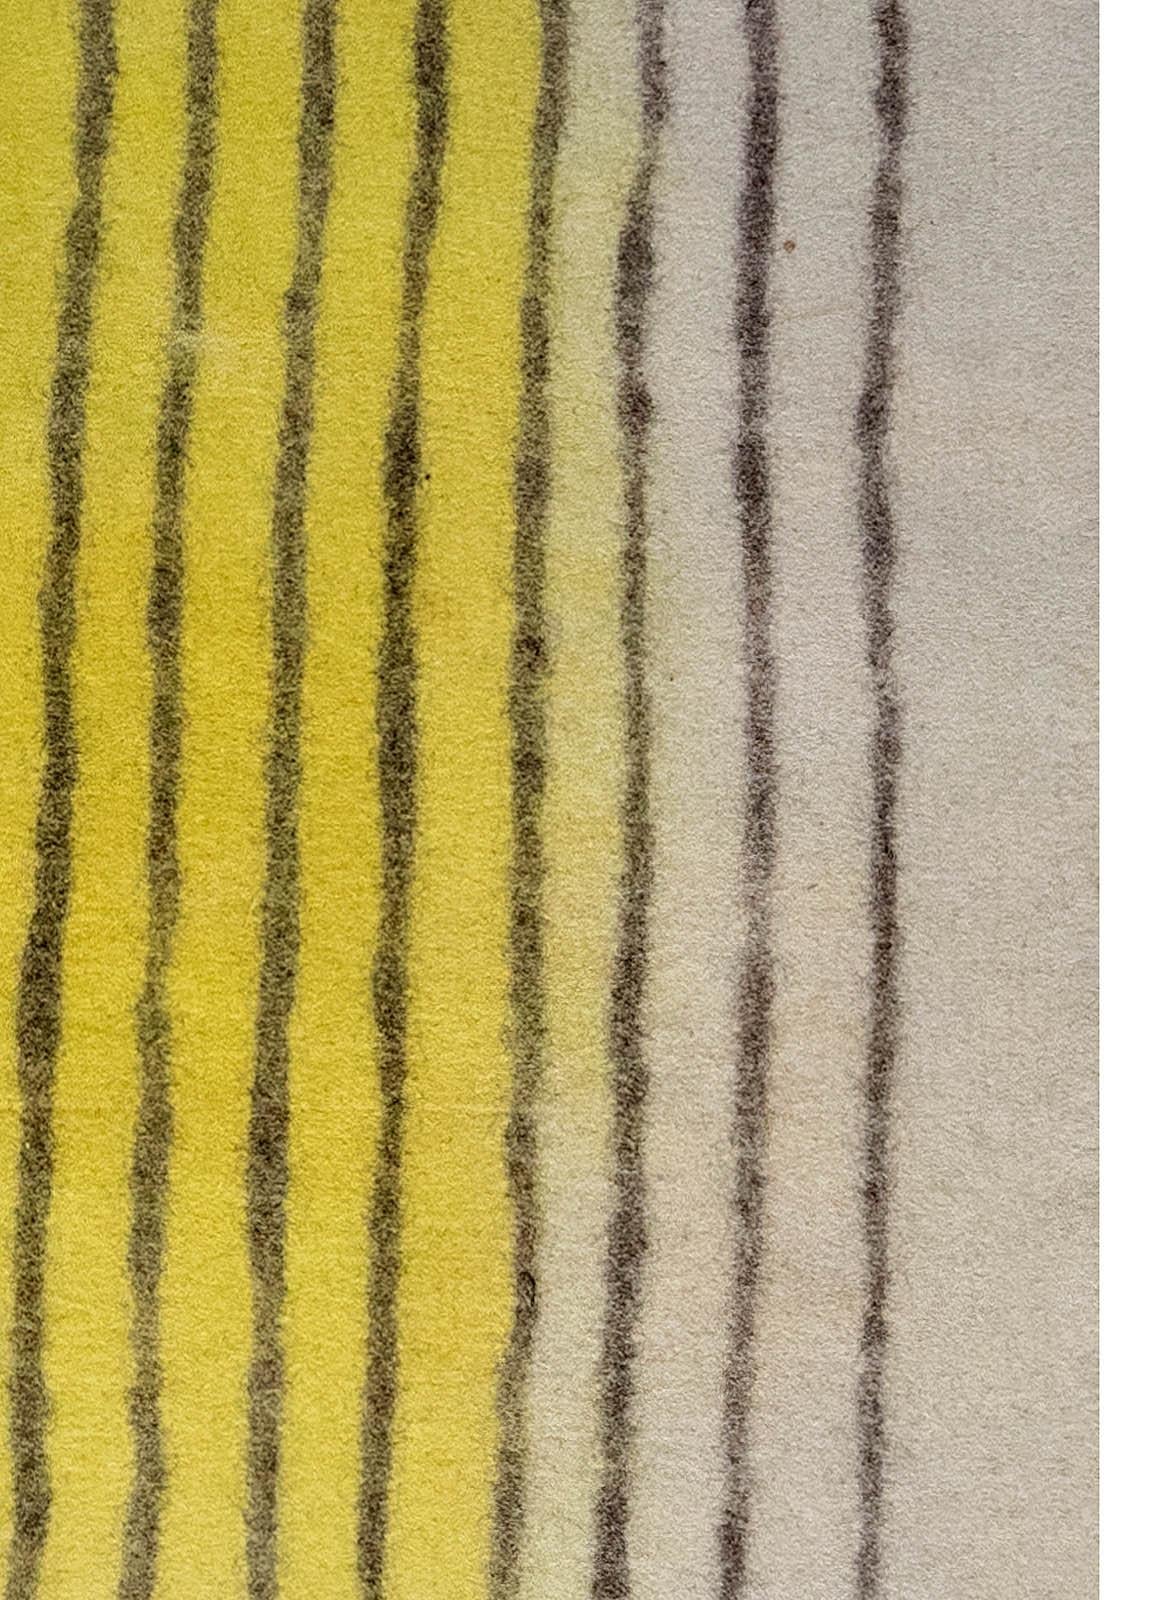 Modern Striped Yellow Black Hand Knotted Felt Rug by Doris Leslie Blau In New Condition For Sale In New York, NY